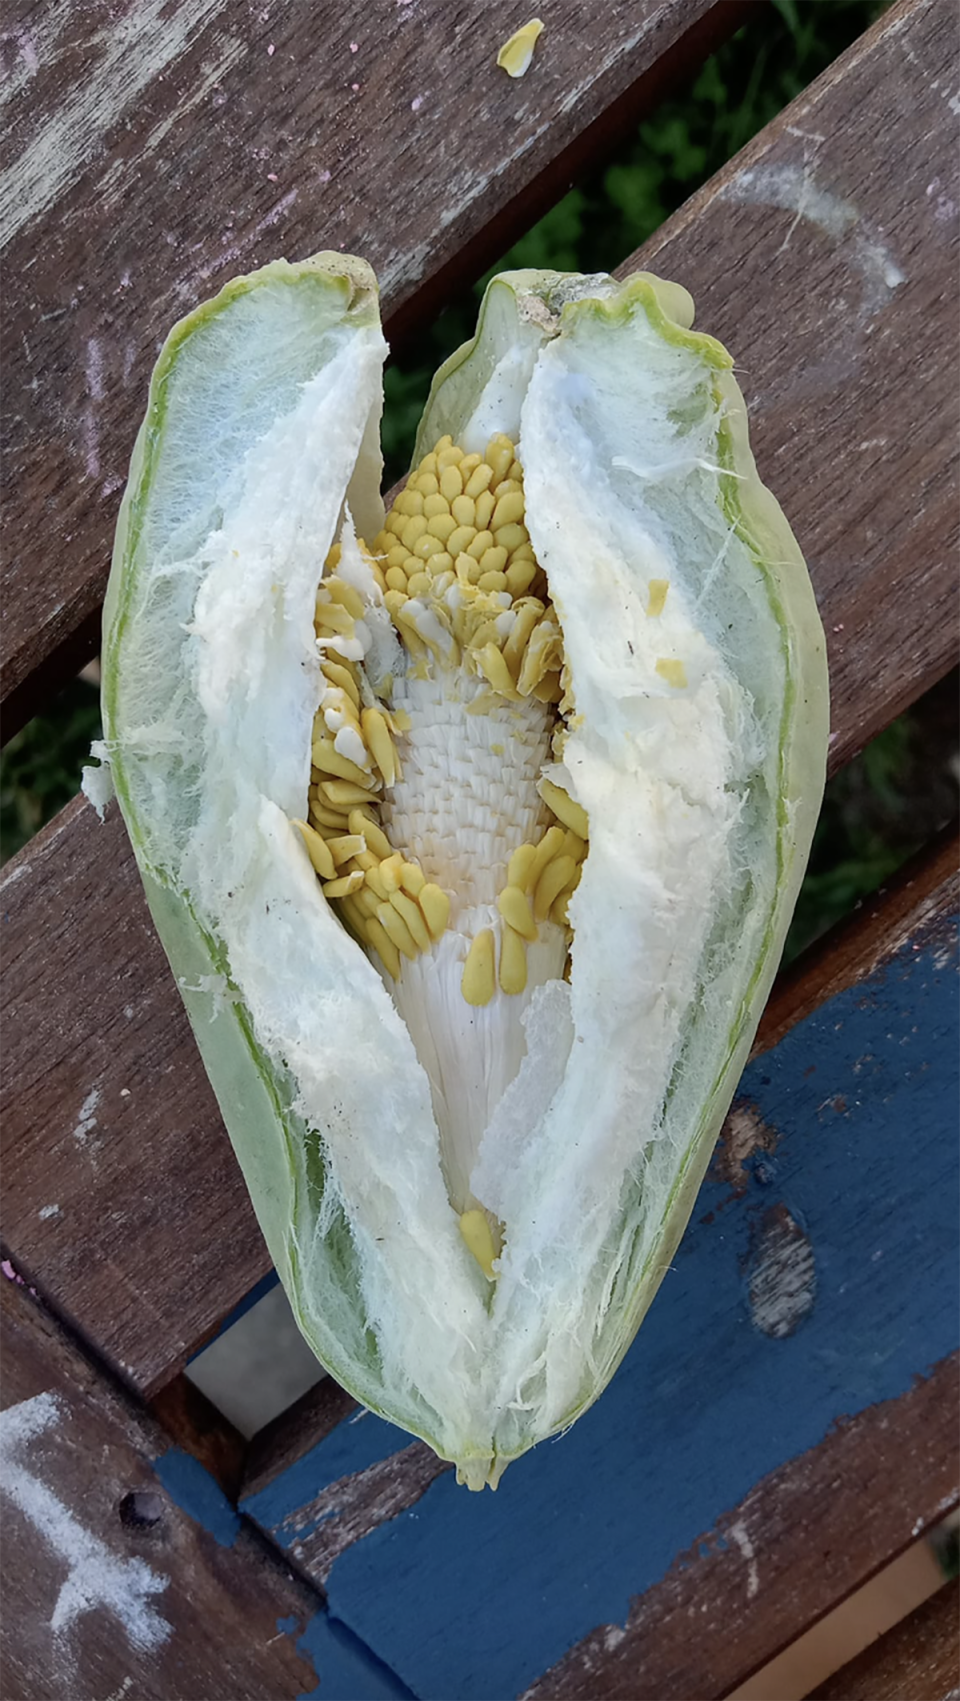 The yellow seeds inside the Moth vine fruit cut open.